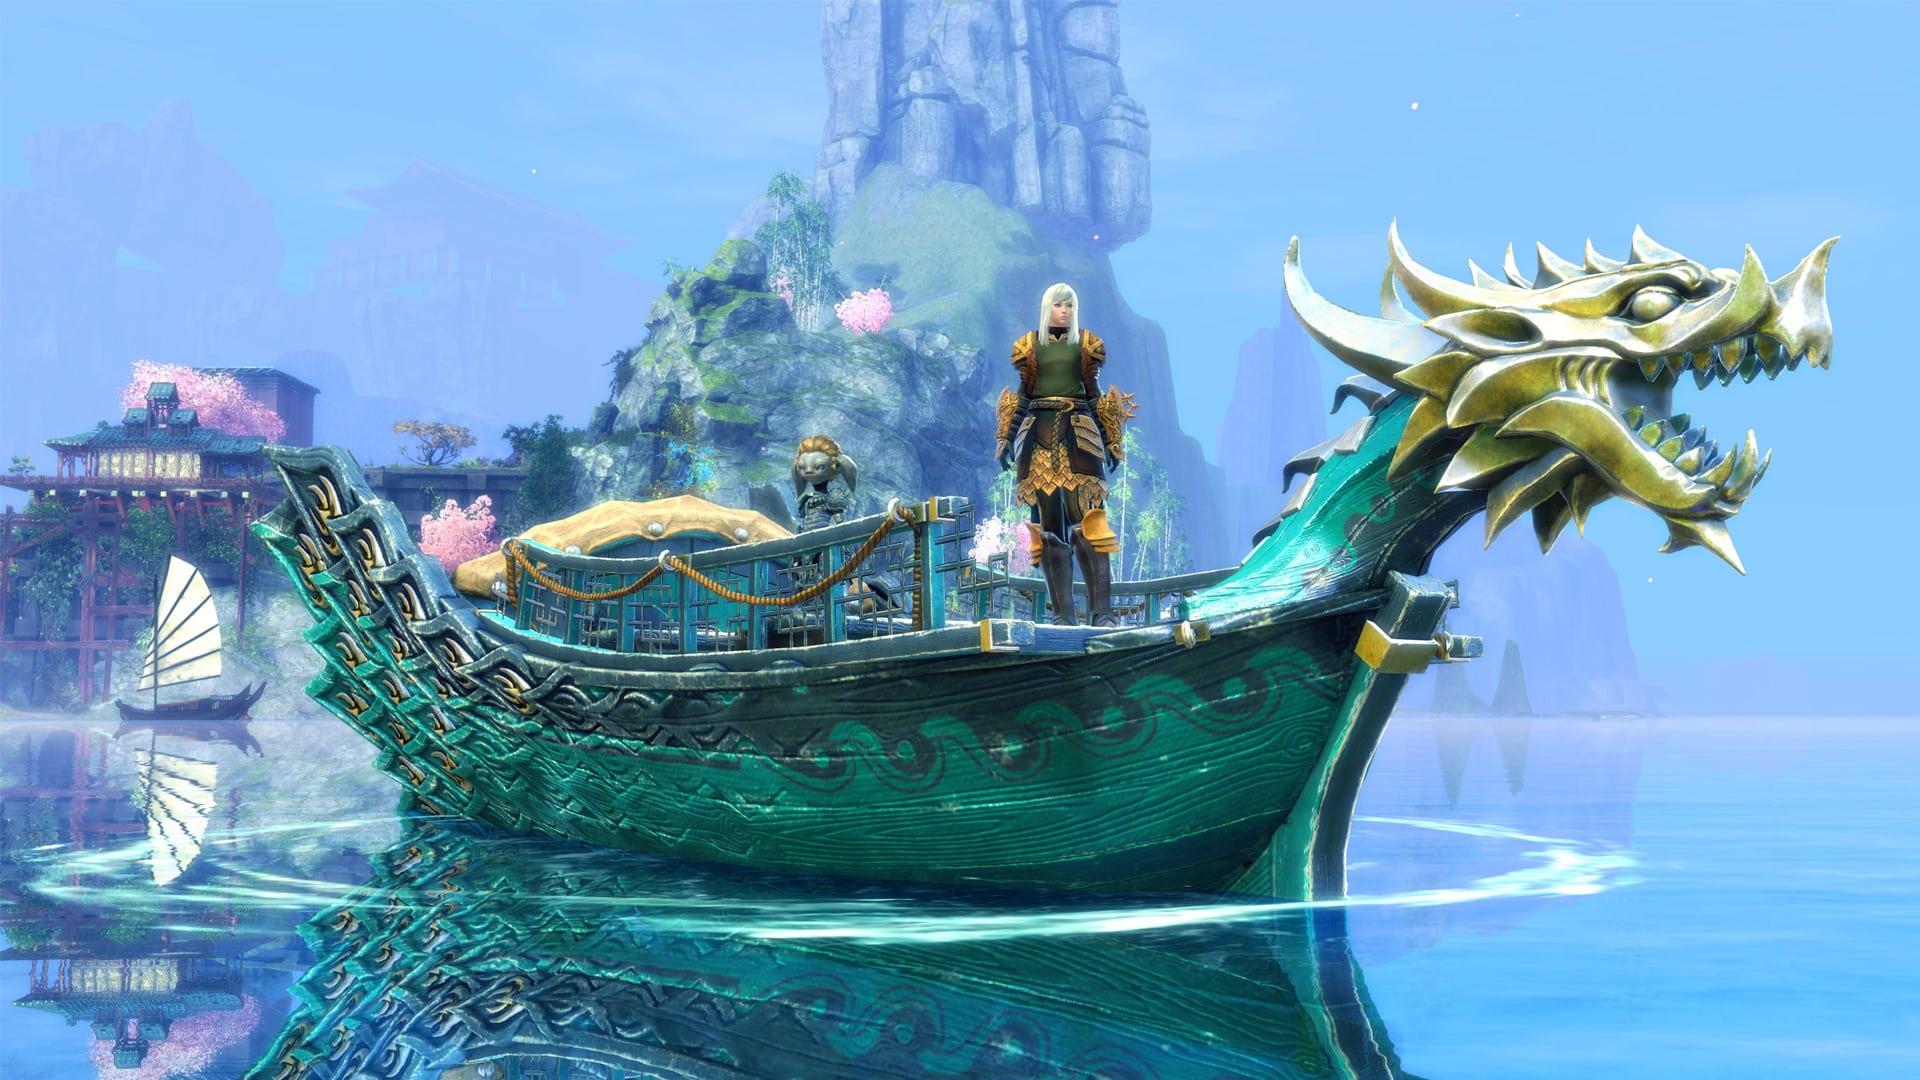 guild wars 2 end of dragons character fishing on a skiff